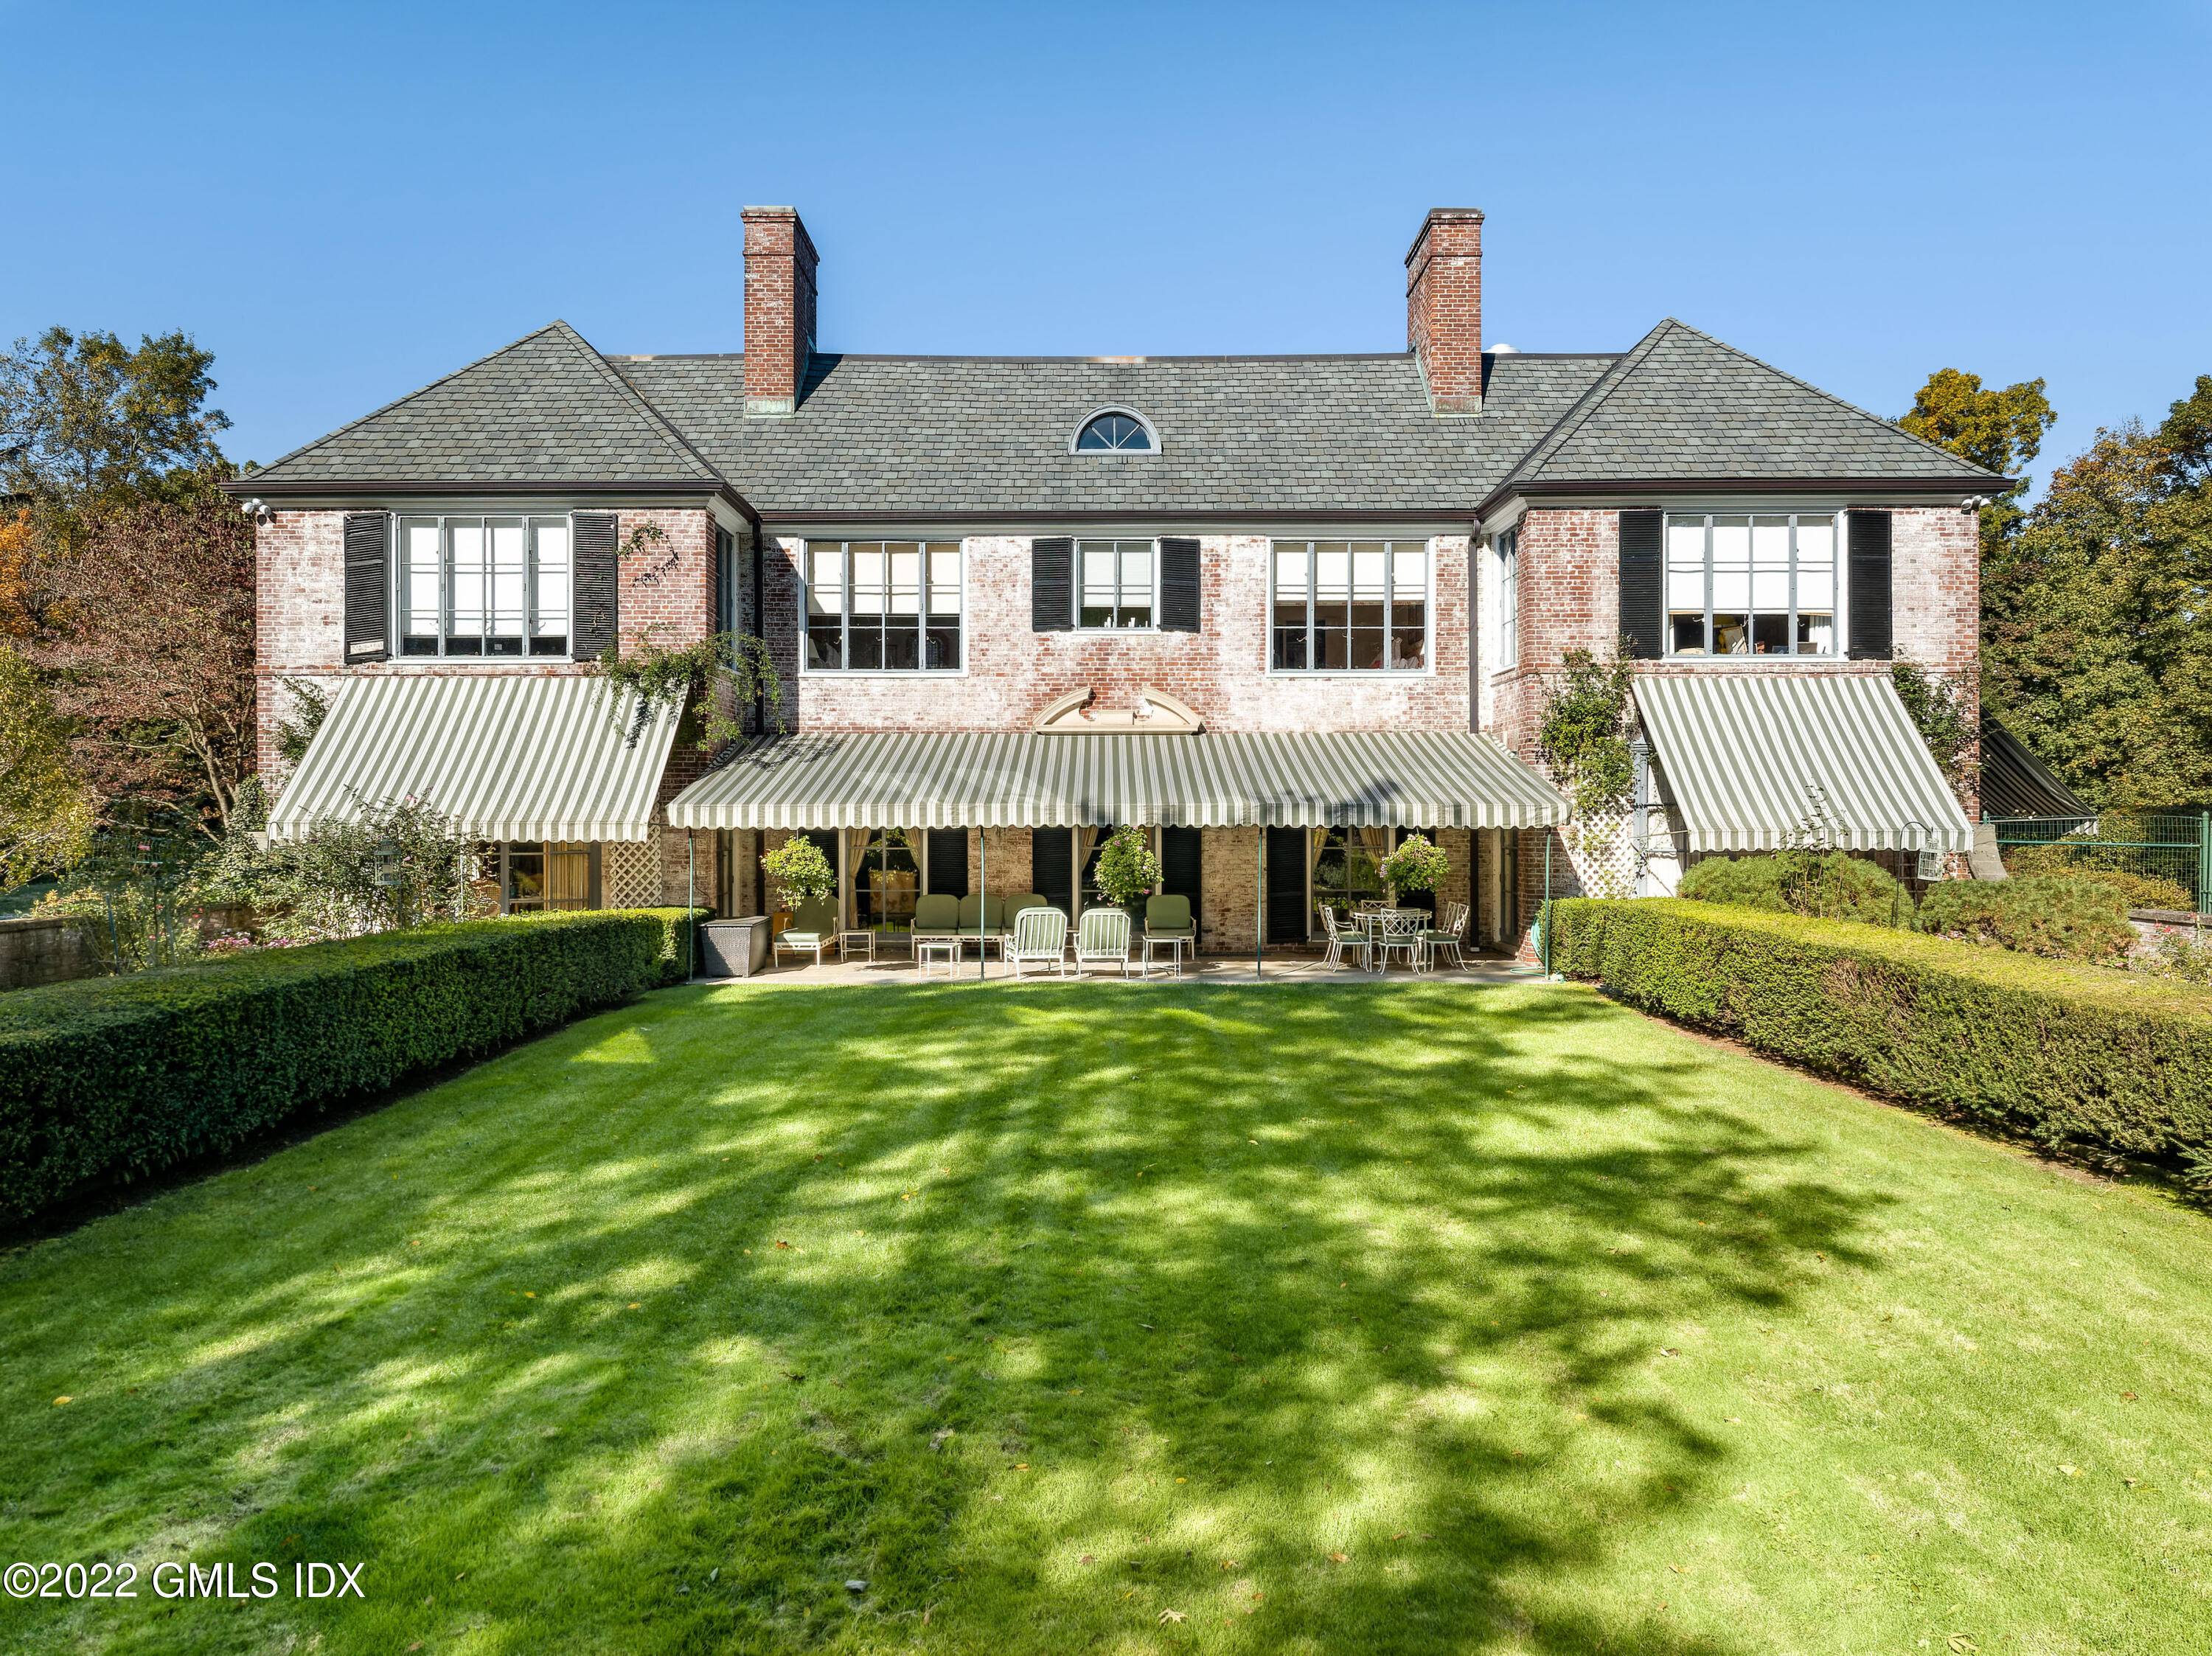 Beautifully situated on 8 acres is this classic 1929 Georgian brick manor near town.